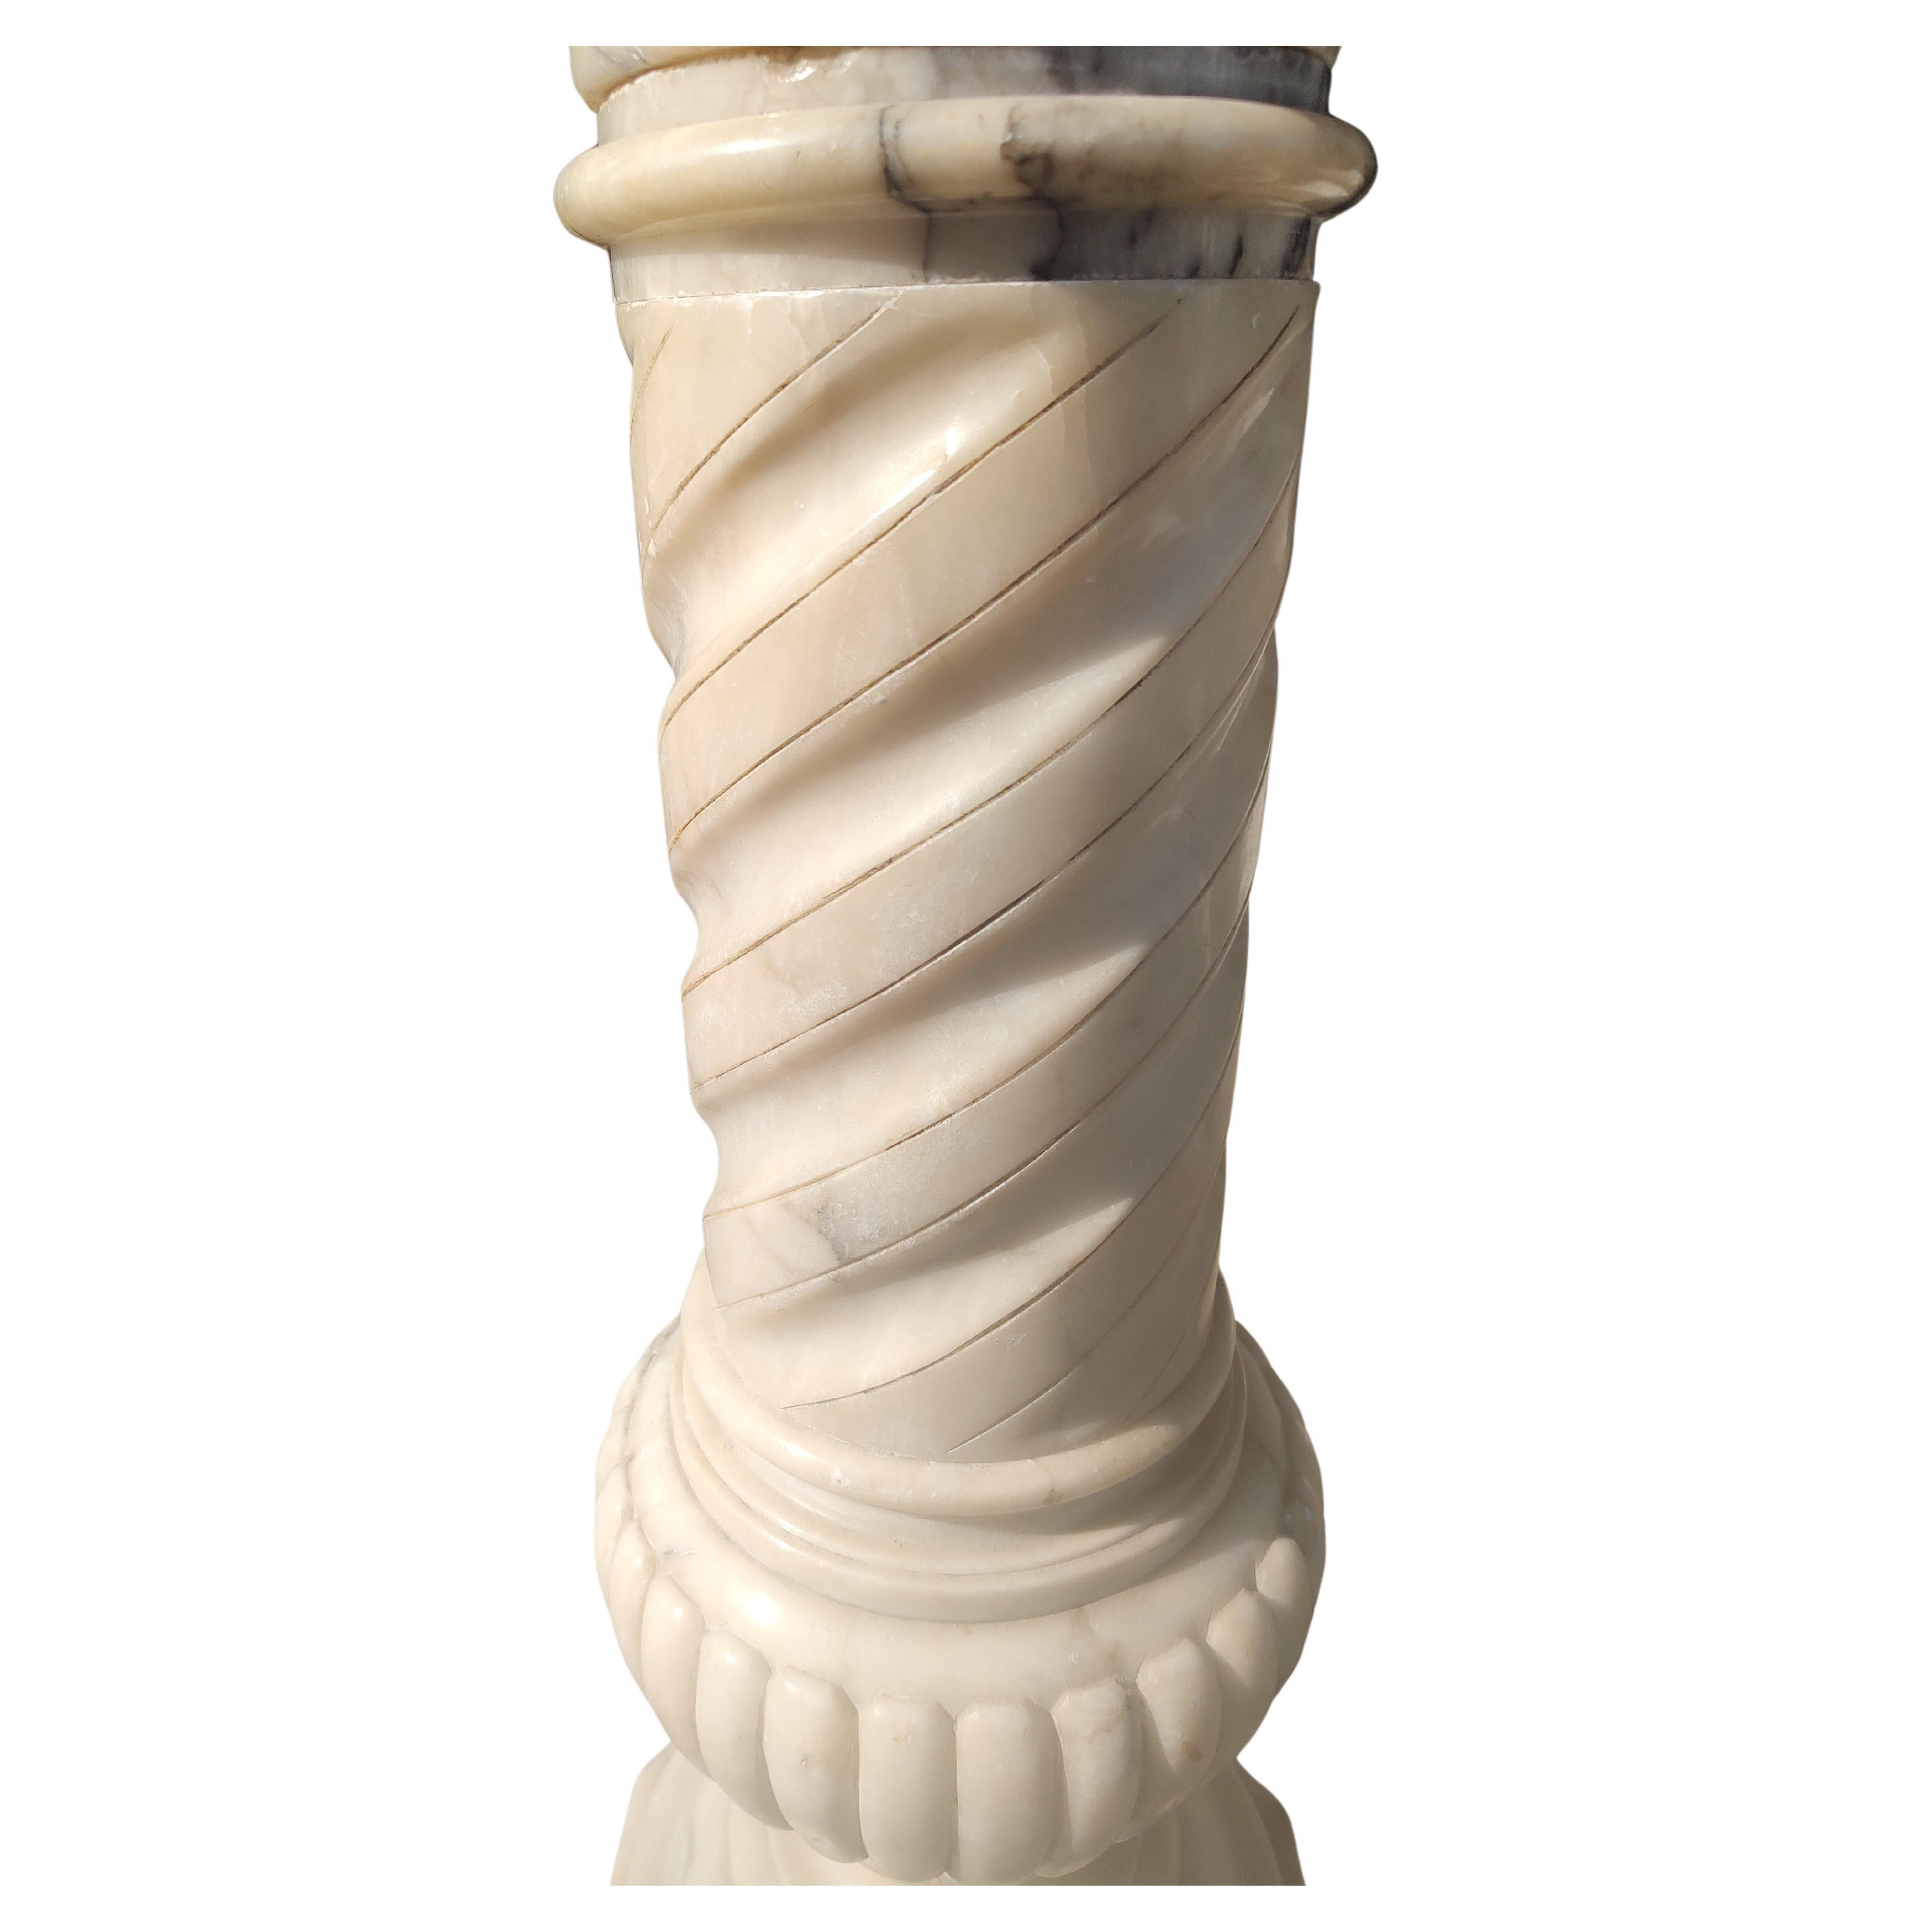 Neoclassical Revival Early Italian Carved Carrara Marble Pedestal C1920 For Sale